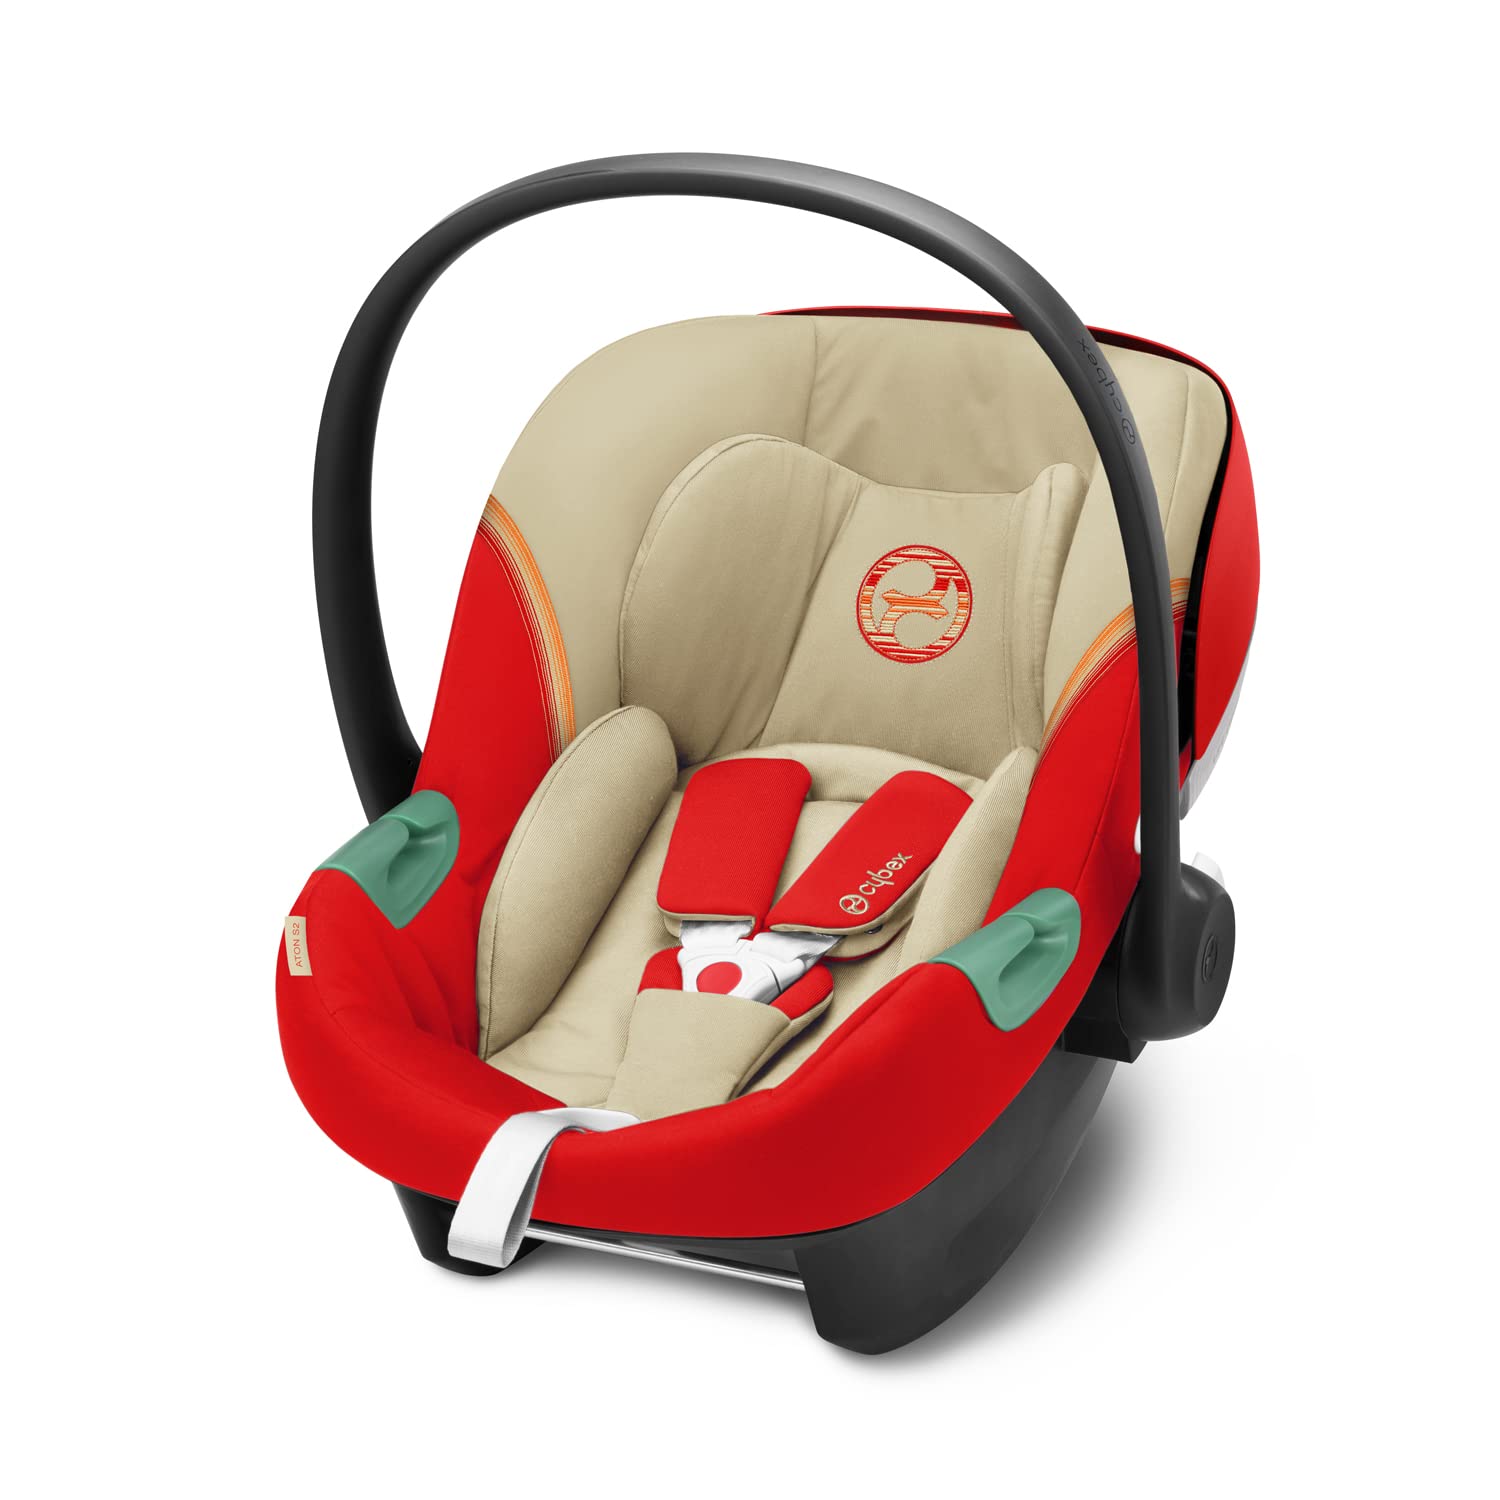 CYBEX Aton S2 i-Size Baby Car Seat from Birth to Approx. 24 Months, Max. 13